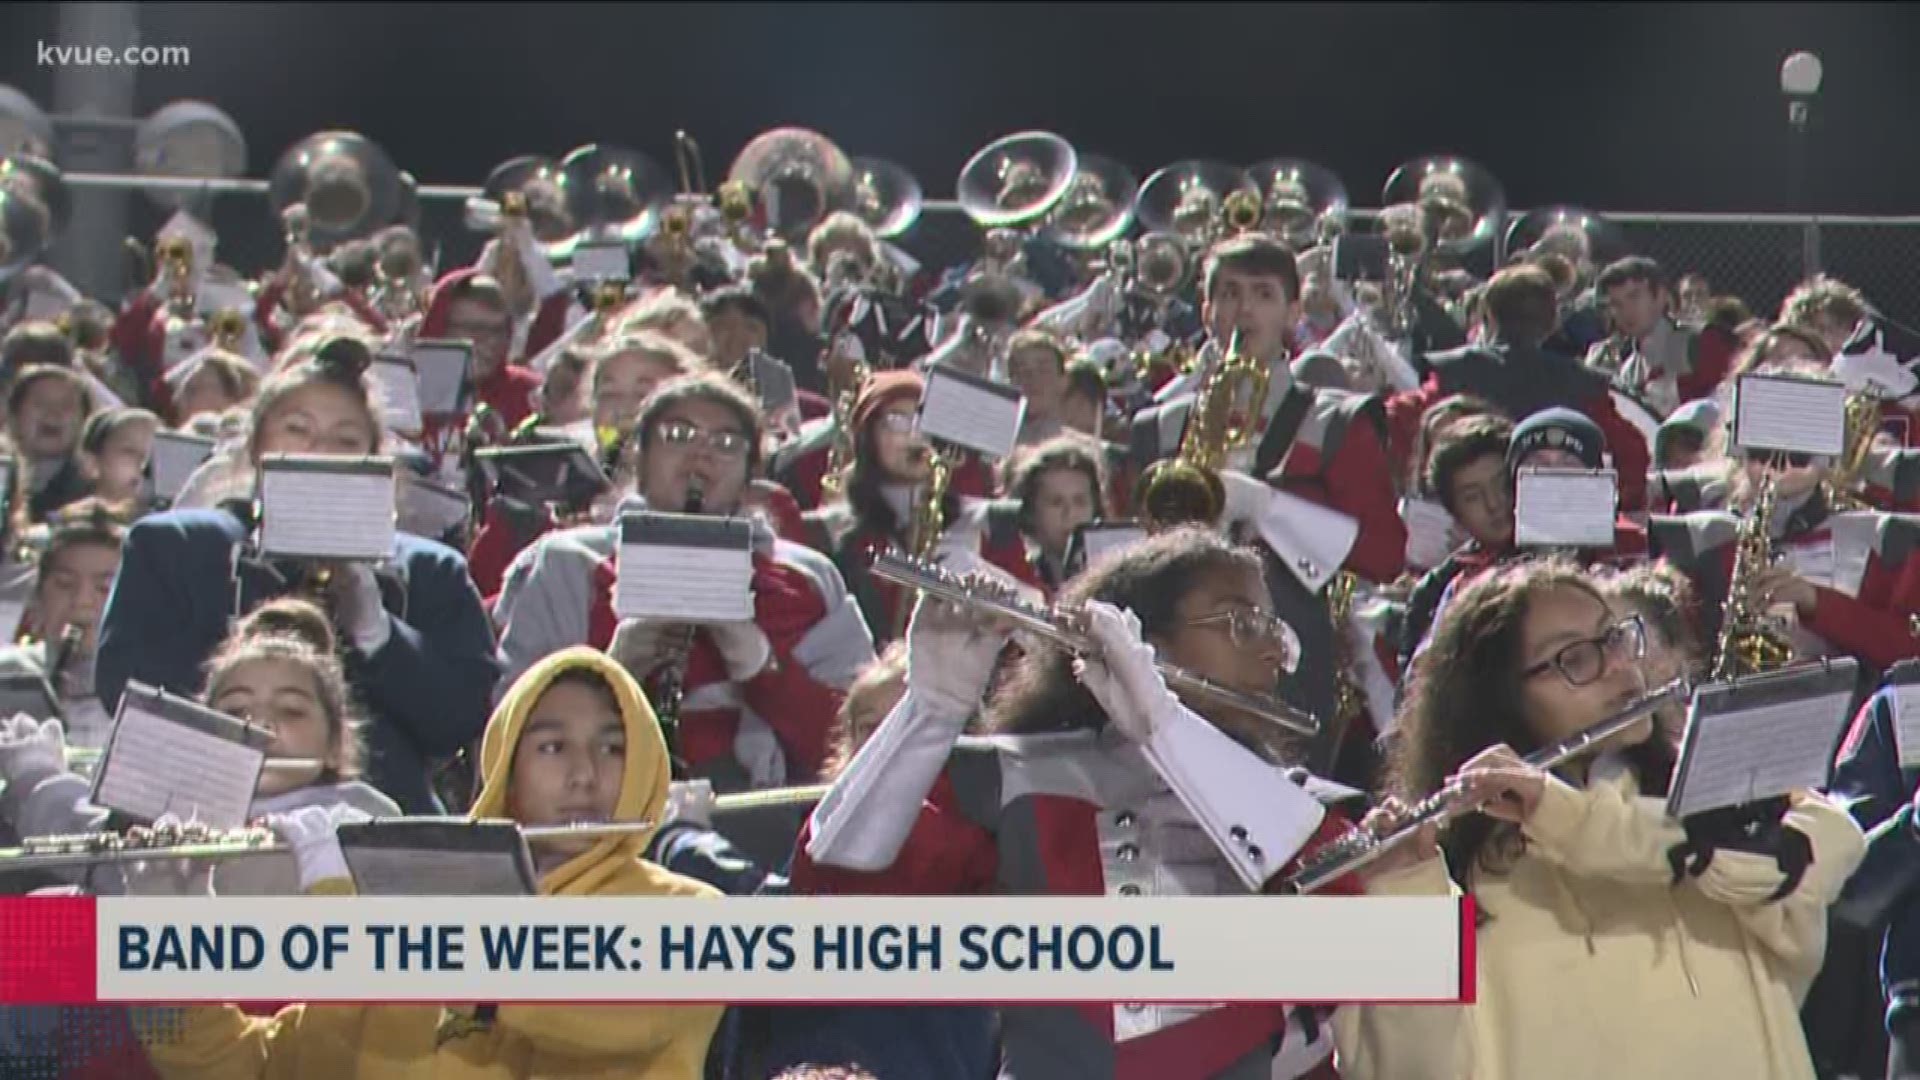 KVUE's Friday Football Fever Band of the Week for our Nov. 15 show goes to Hays High School!